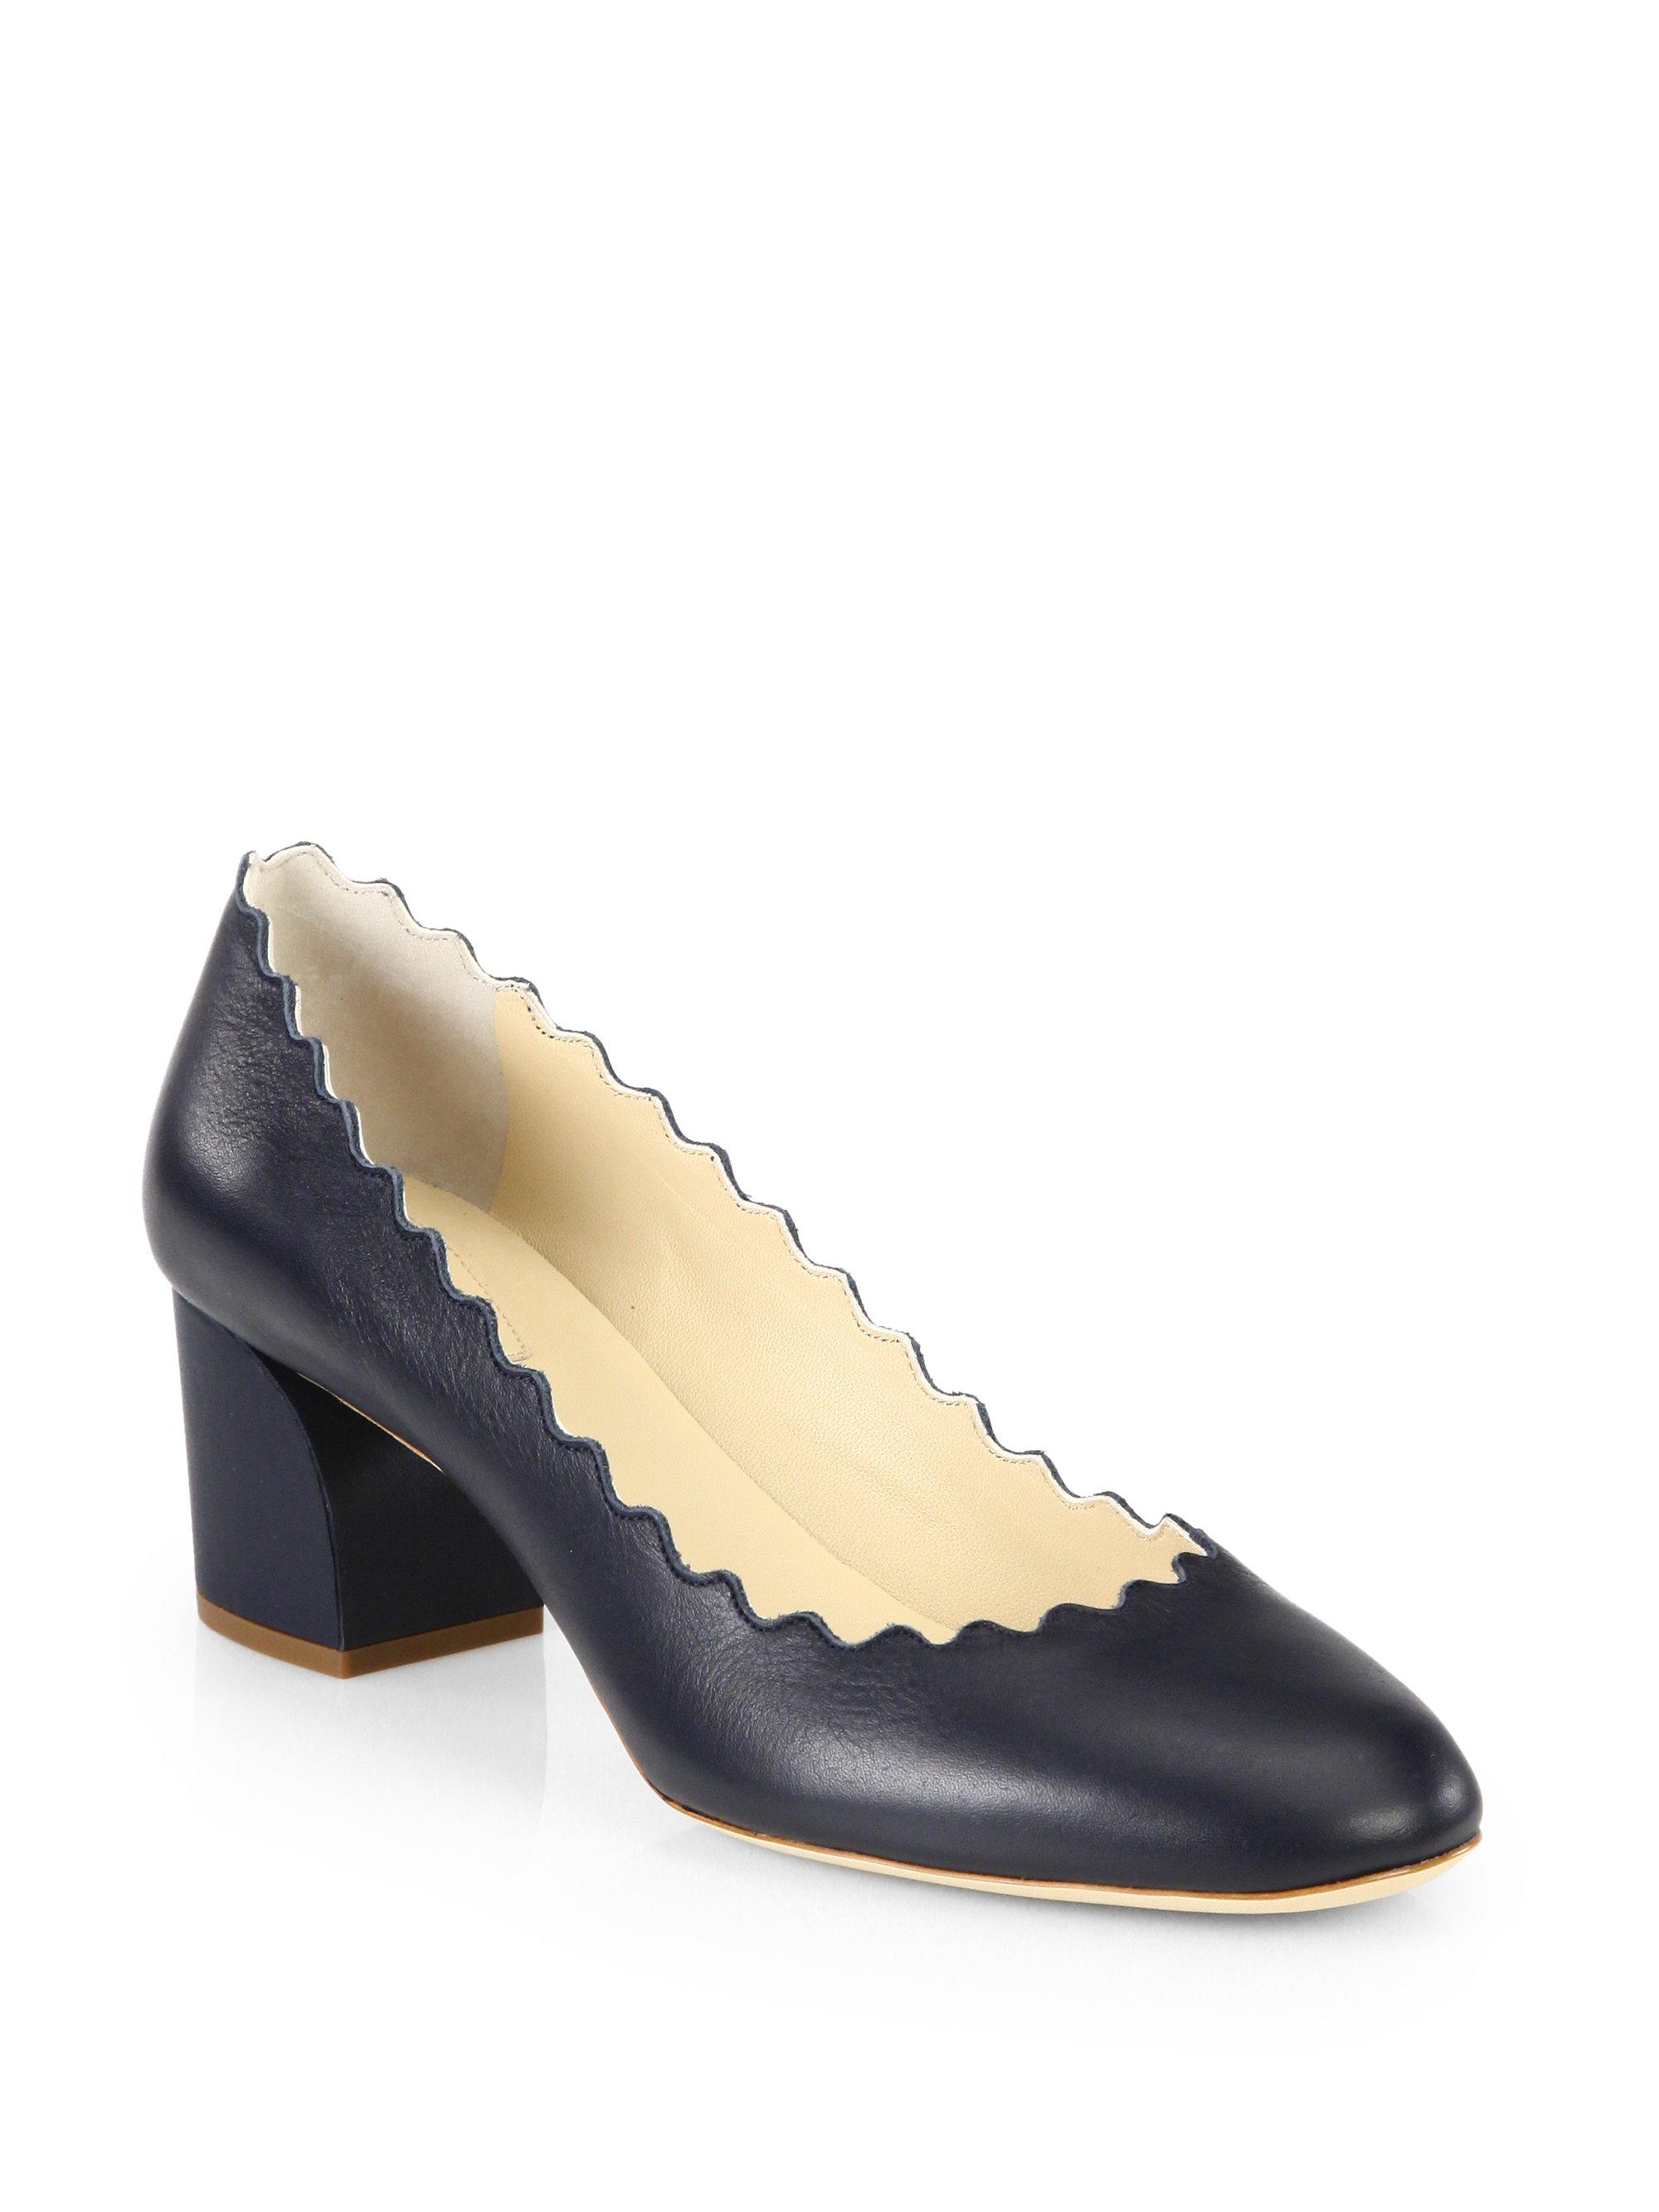 Chloé Lauren Scalloped Leather Pumps in Navy (Blue) | Lyst